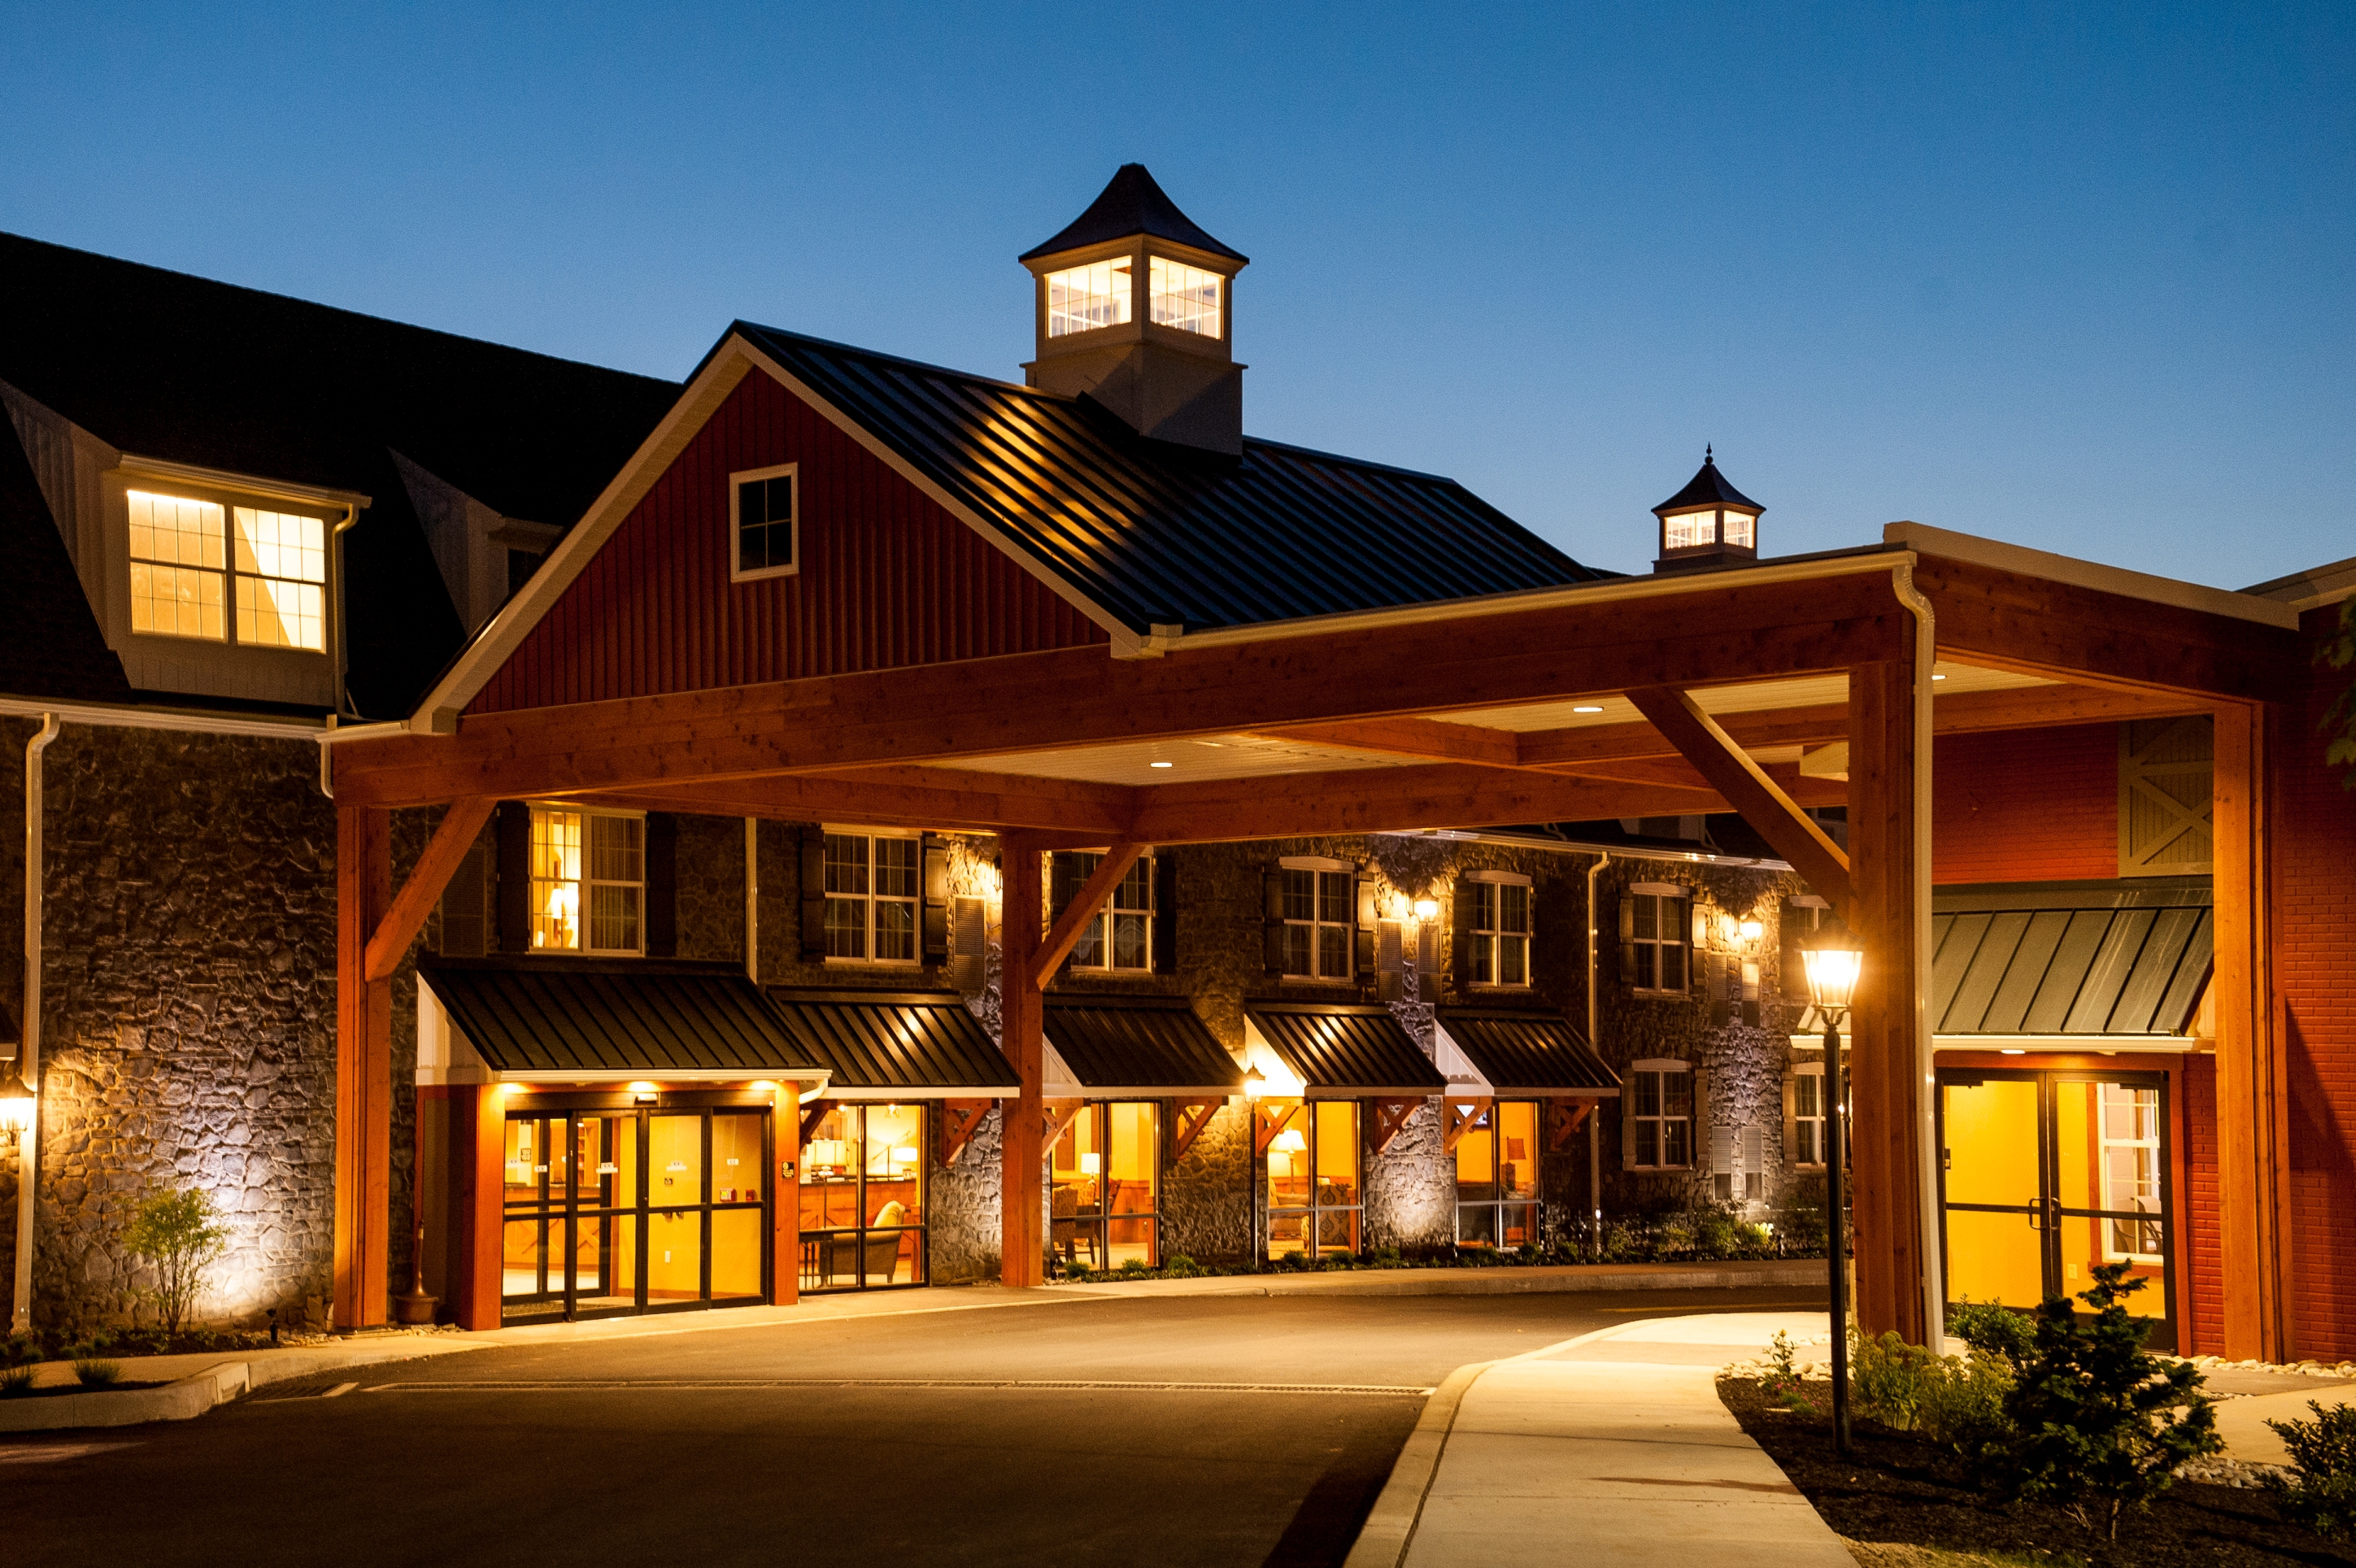 BEST WESTERN in Pennsylvania's Amish Country Completes $7.2 Million